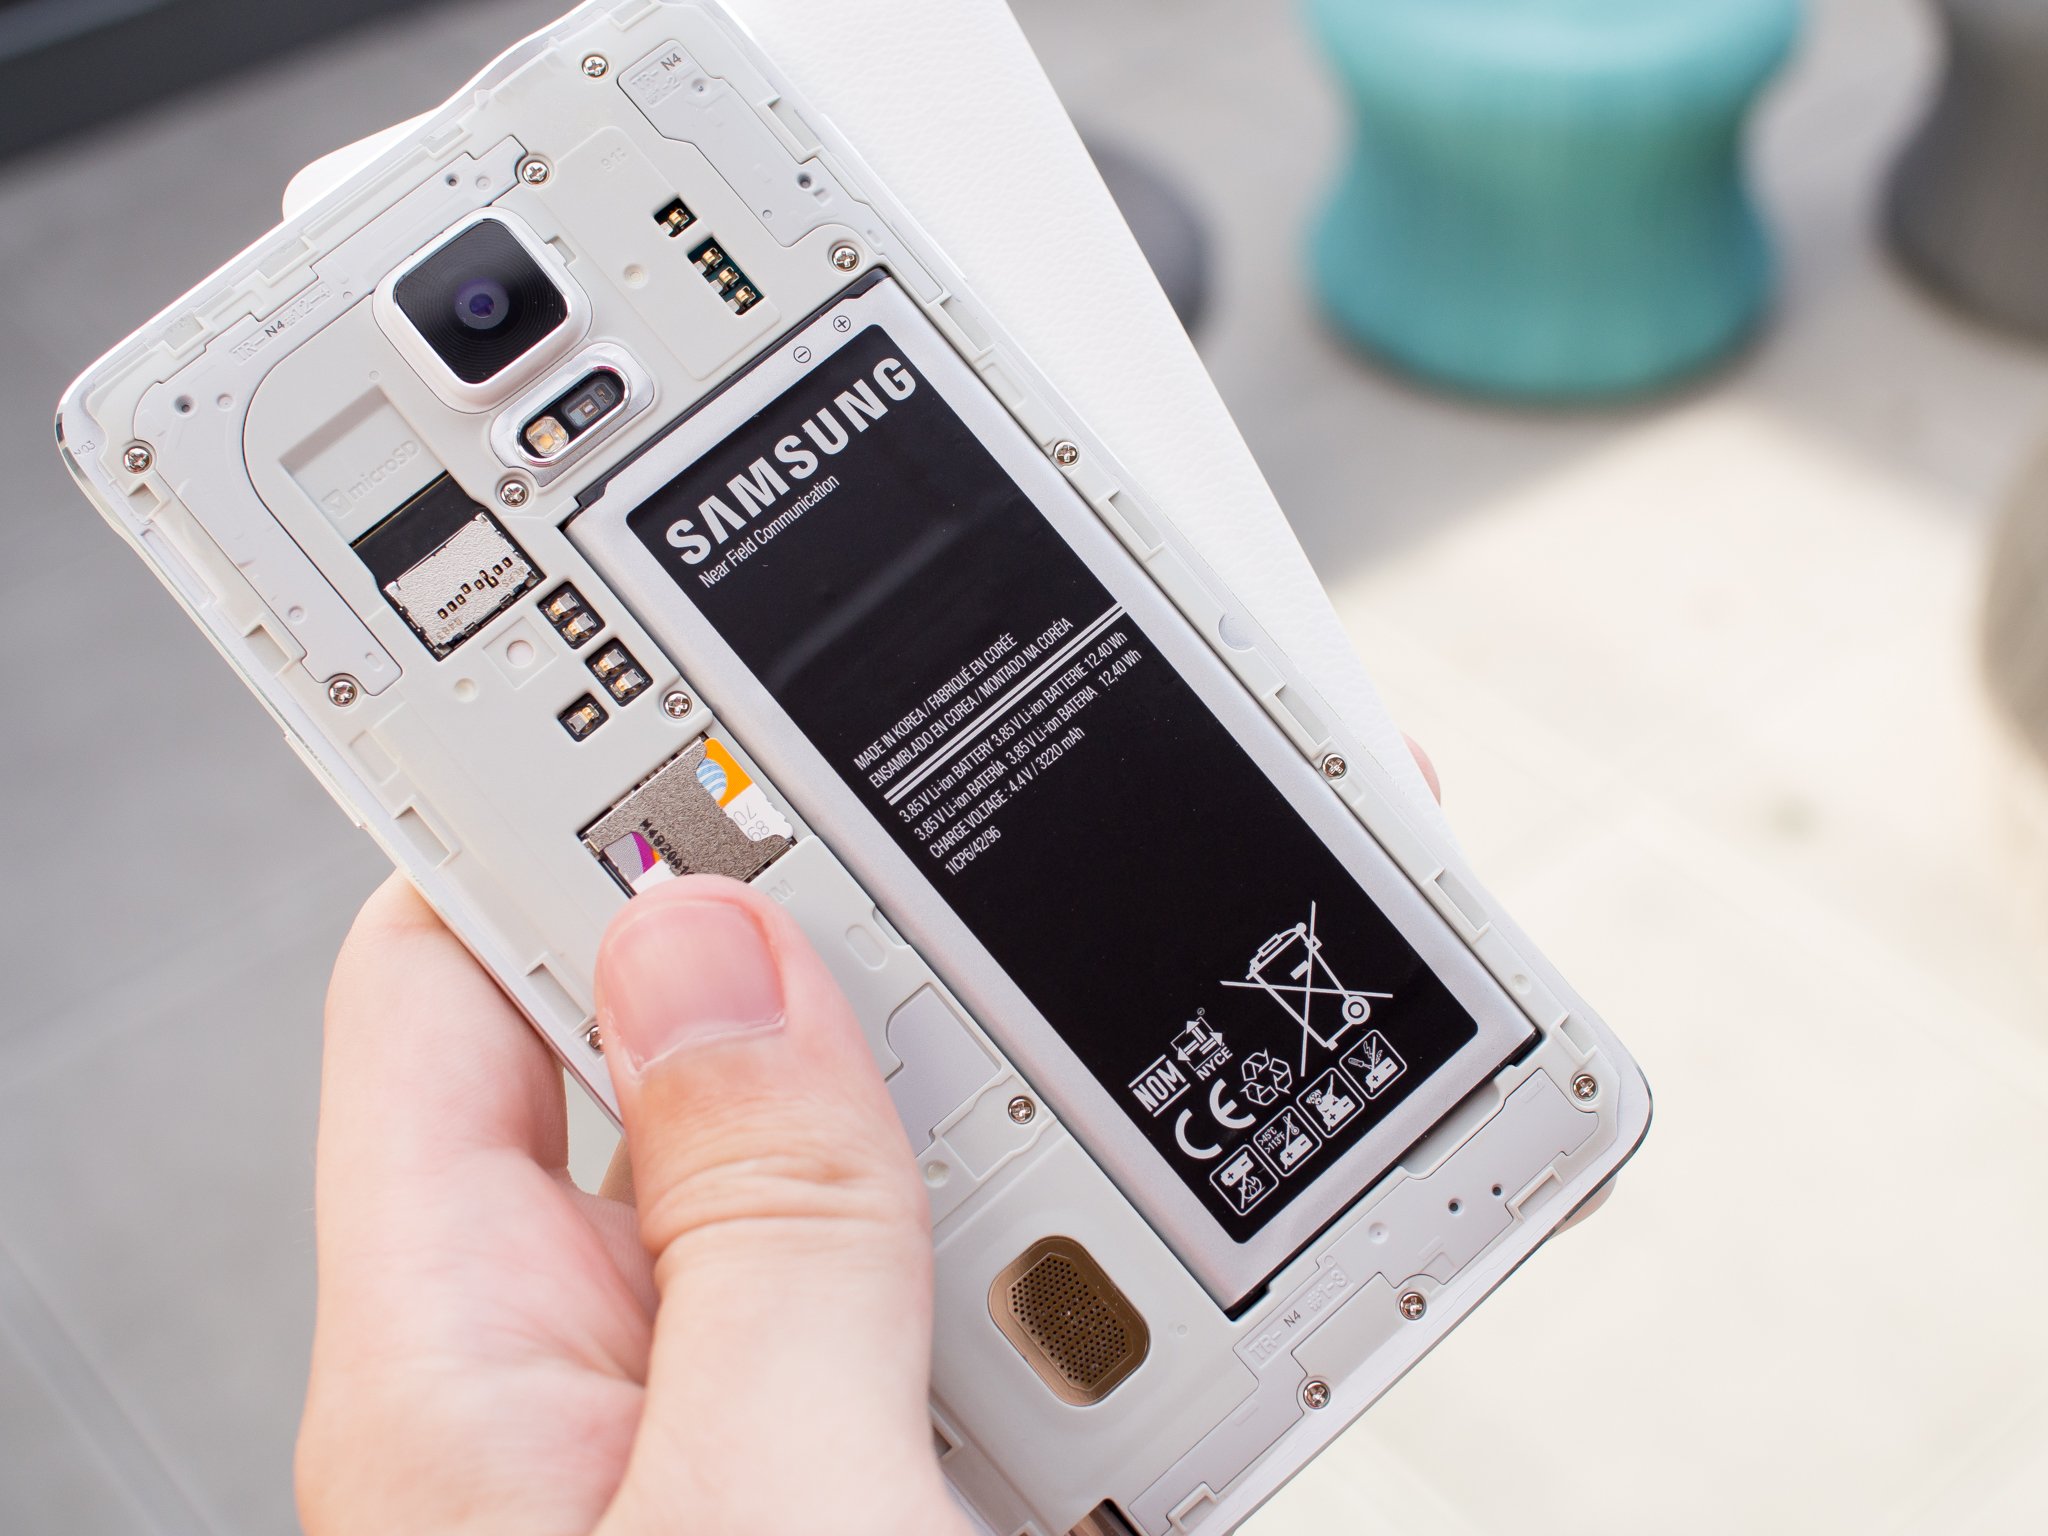 Galaxy Note 4 battery life tips | Android Central